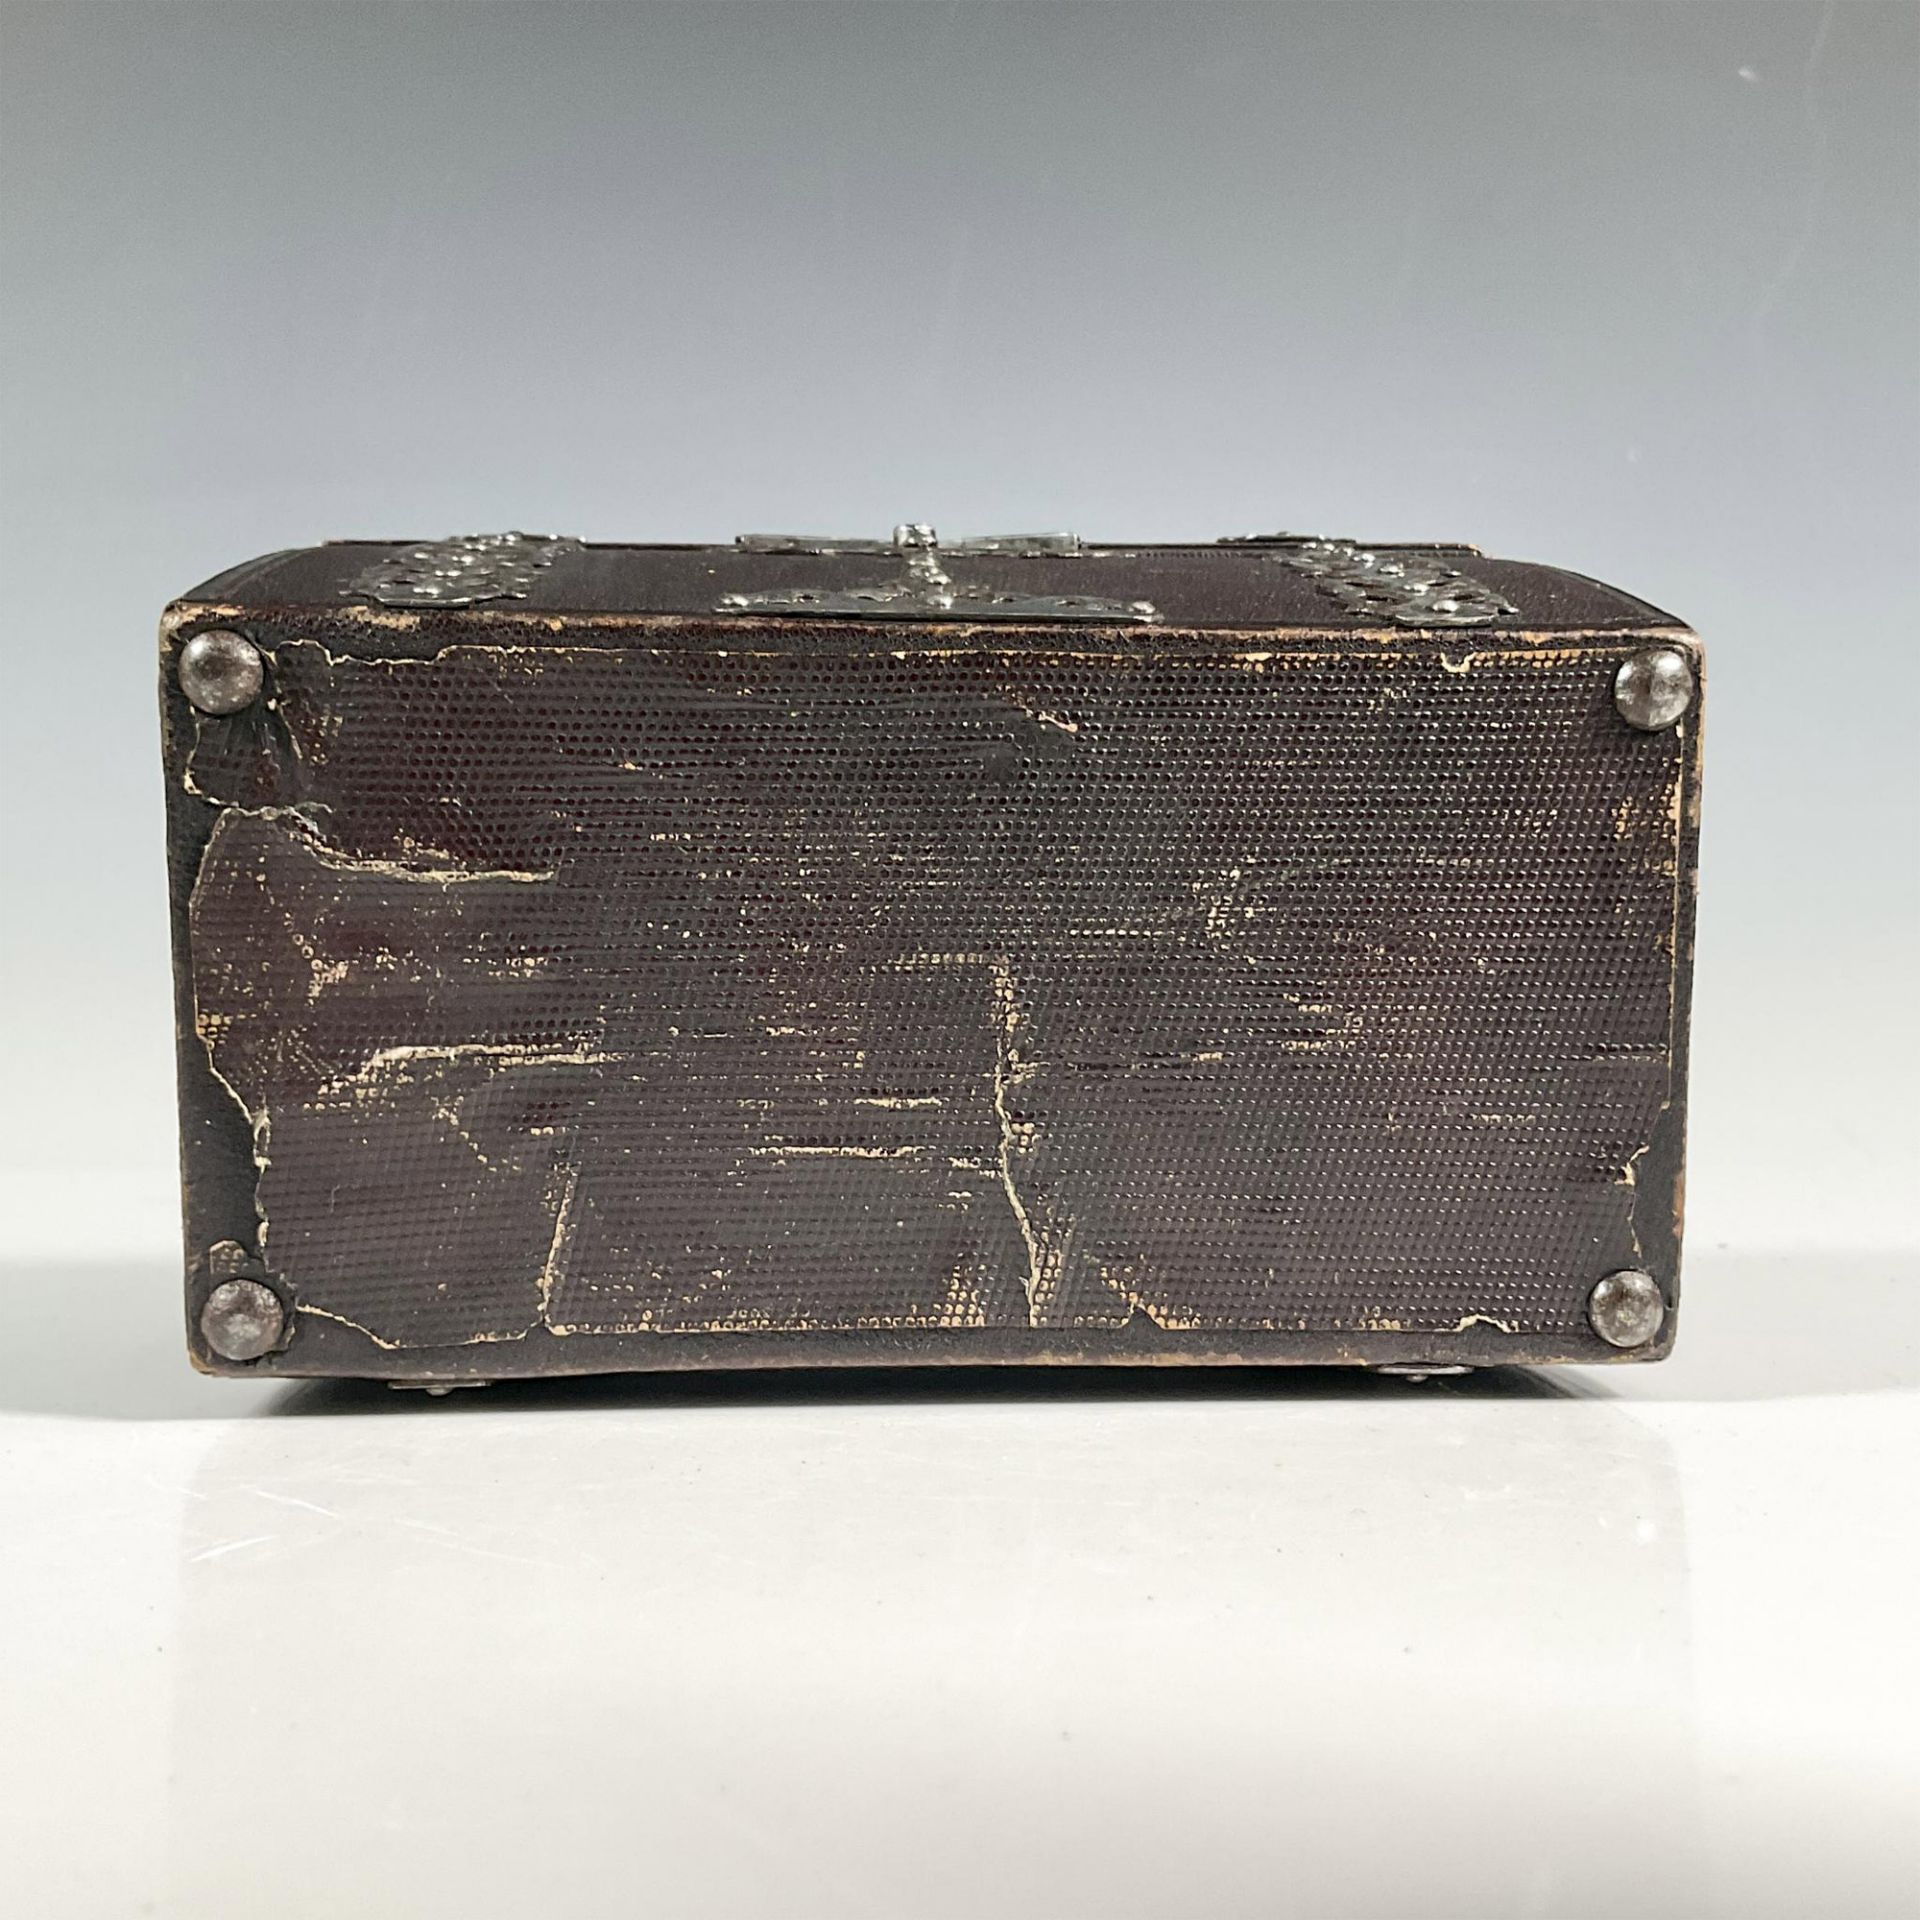 European Steel and Leather Casket Box - Image 4 of 4